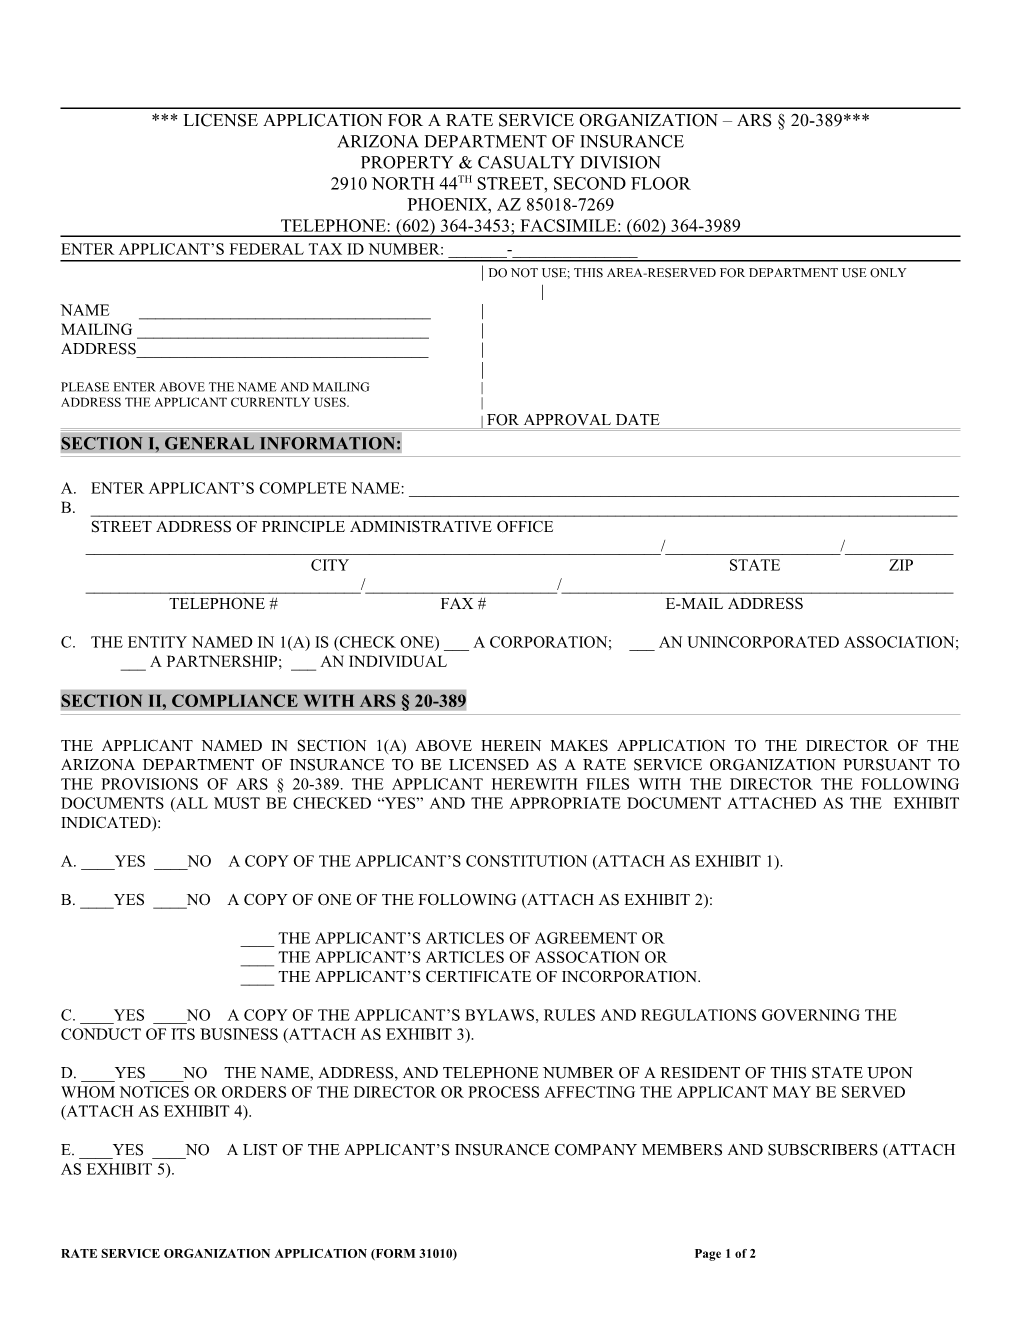 License Application for a Rate Service Organization Ars 20-389